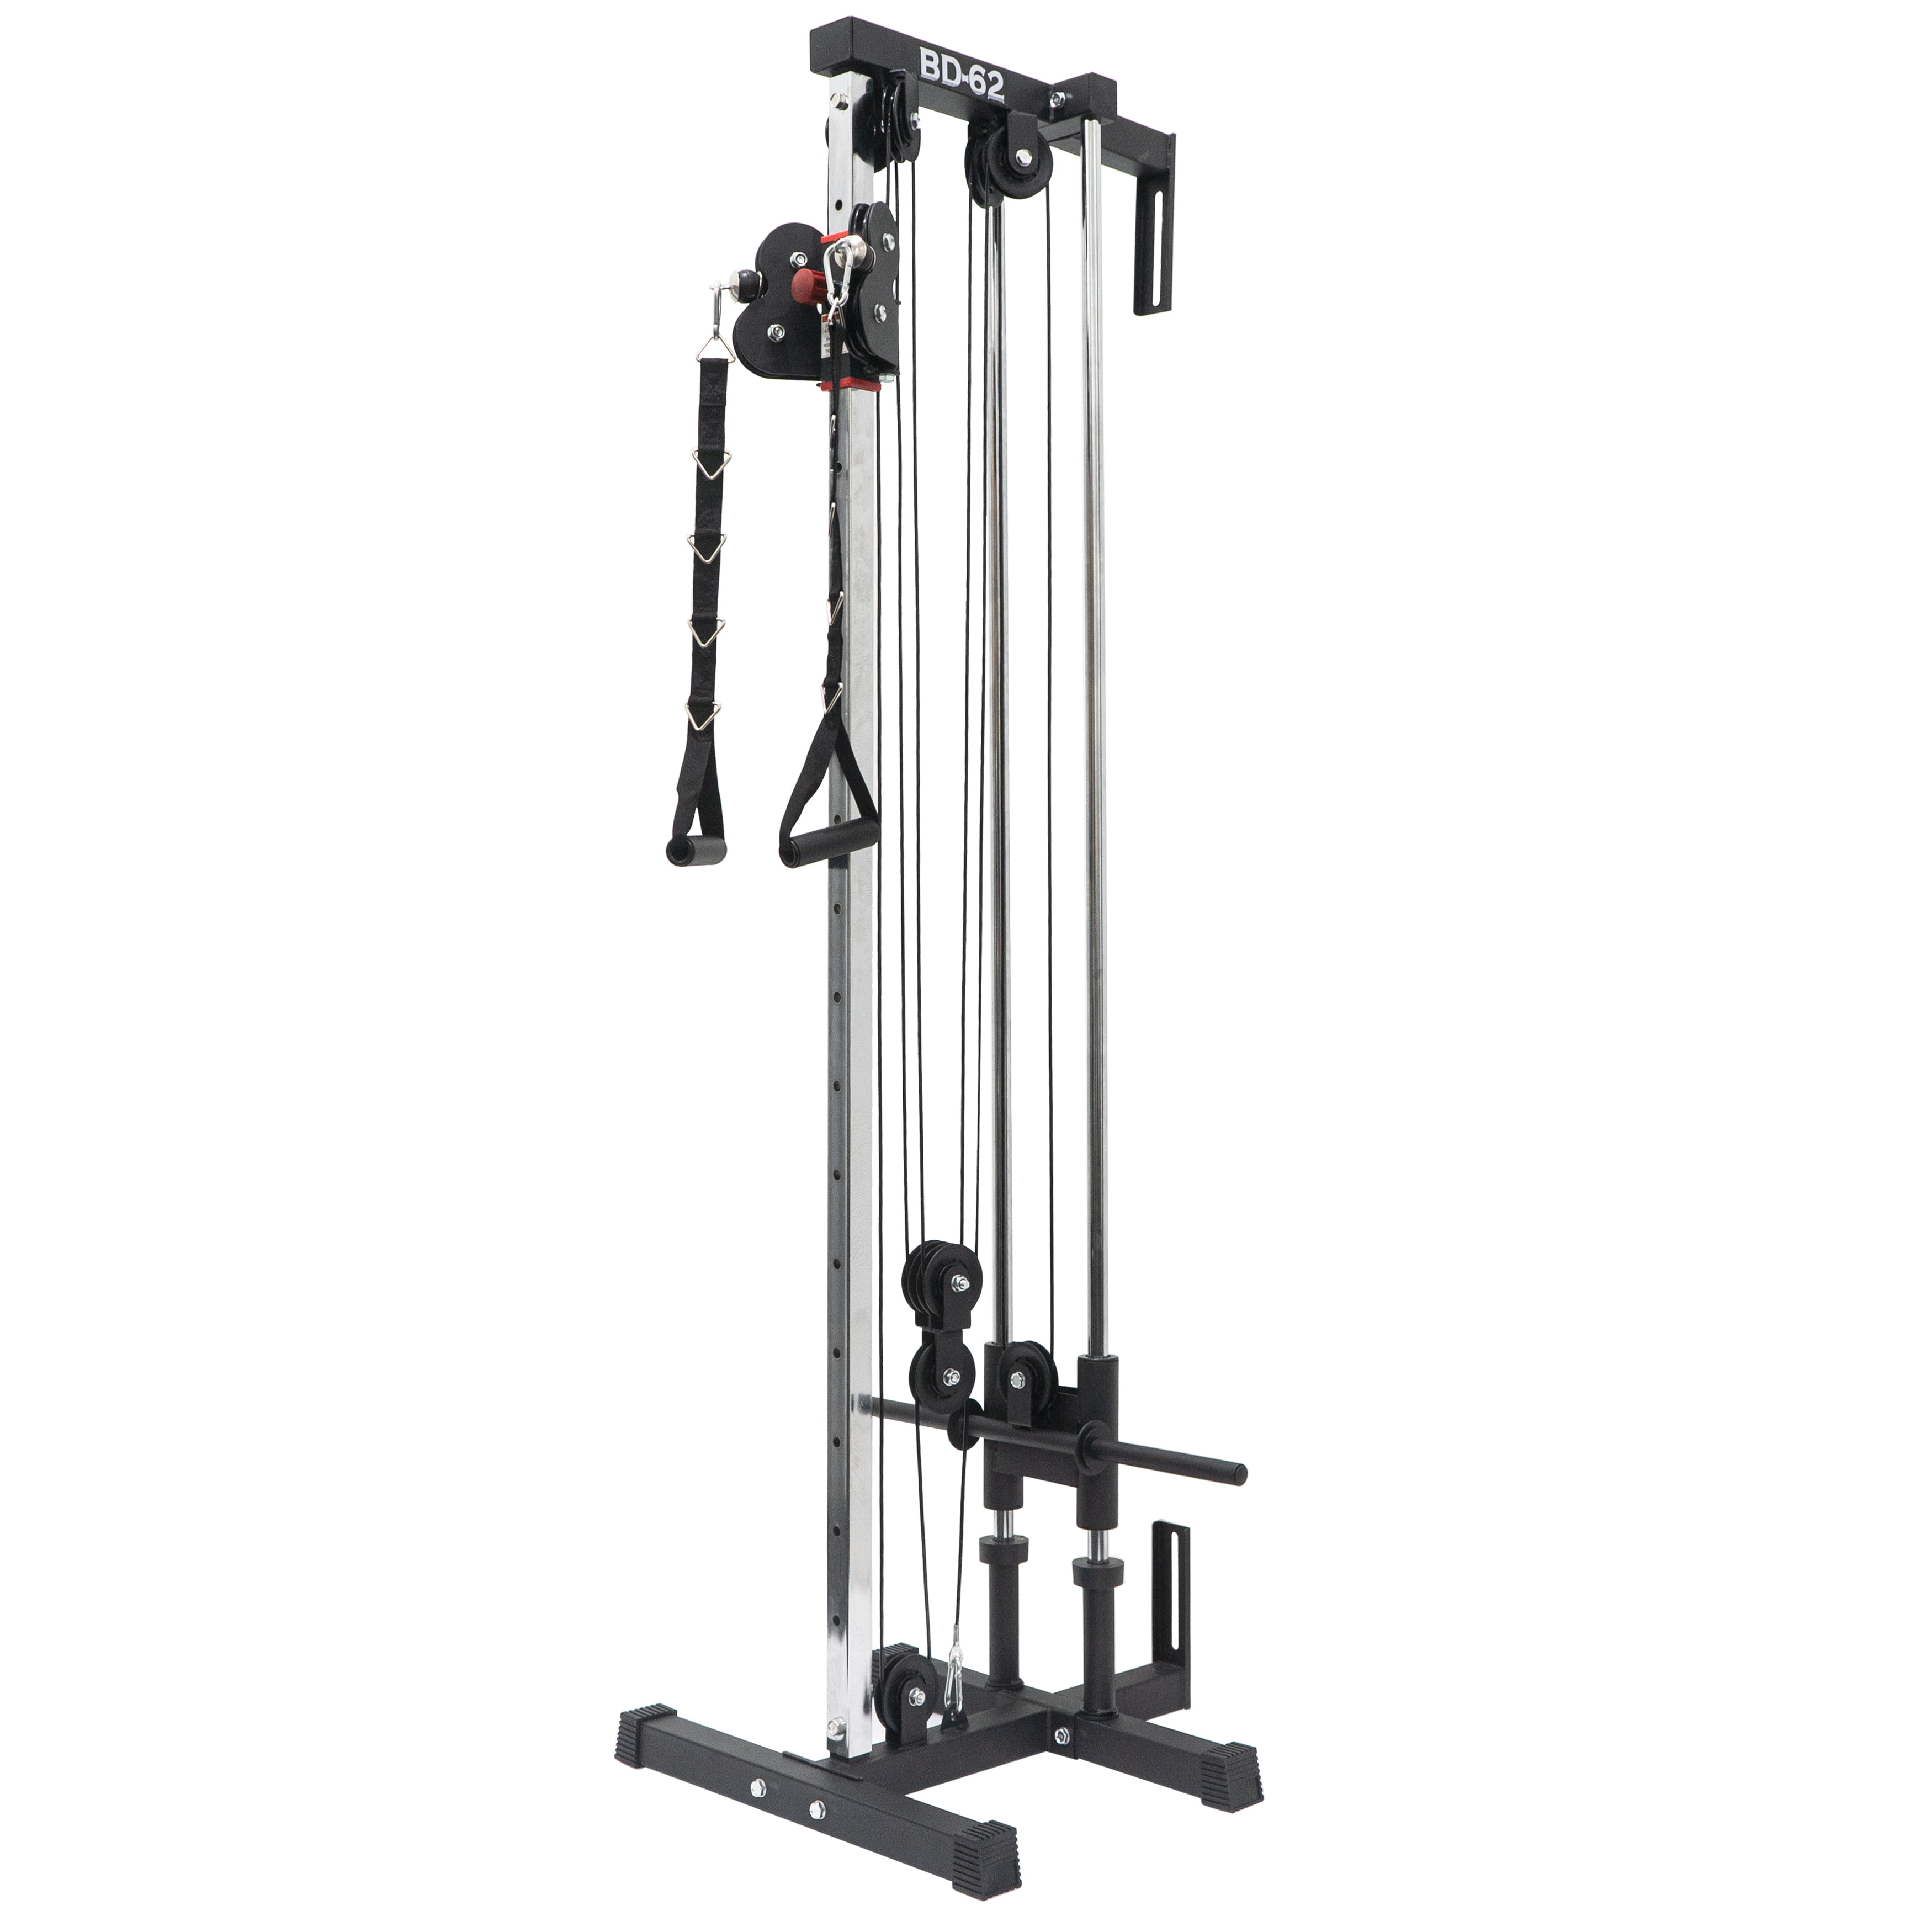 NEW Valor Fitness DP 2 Wall Mount Dip Station FREE SHIPPING